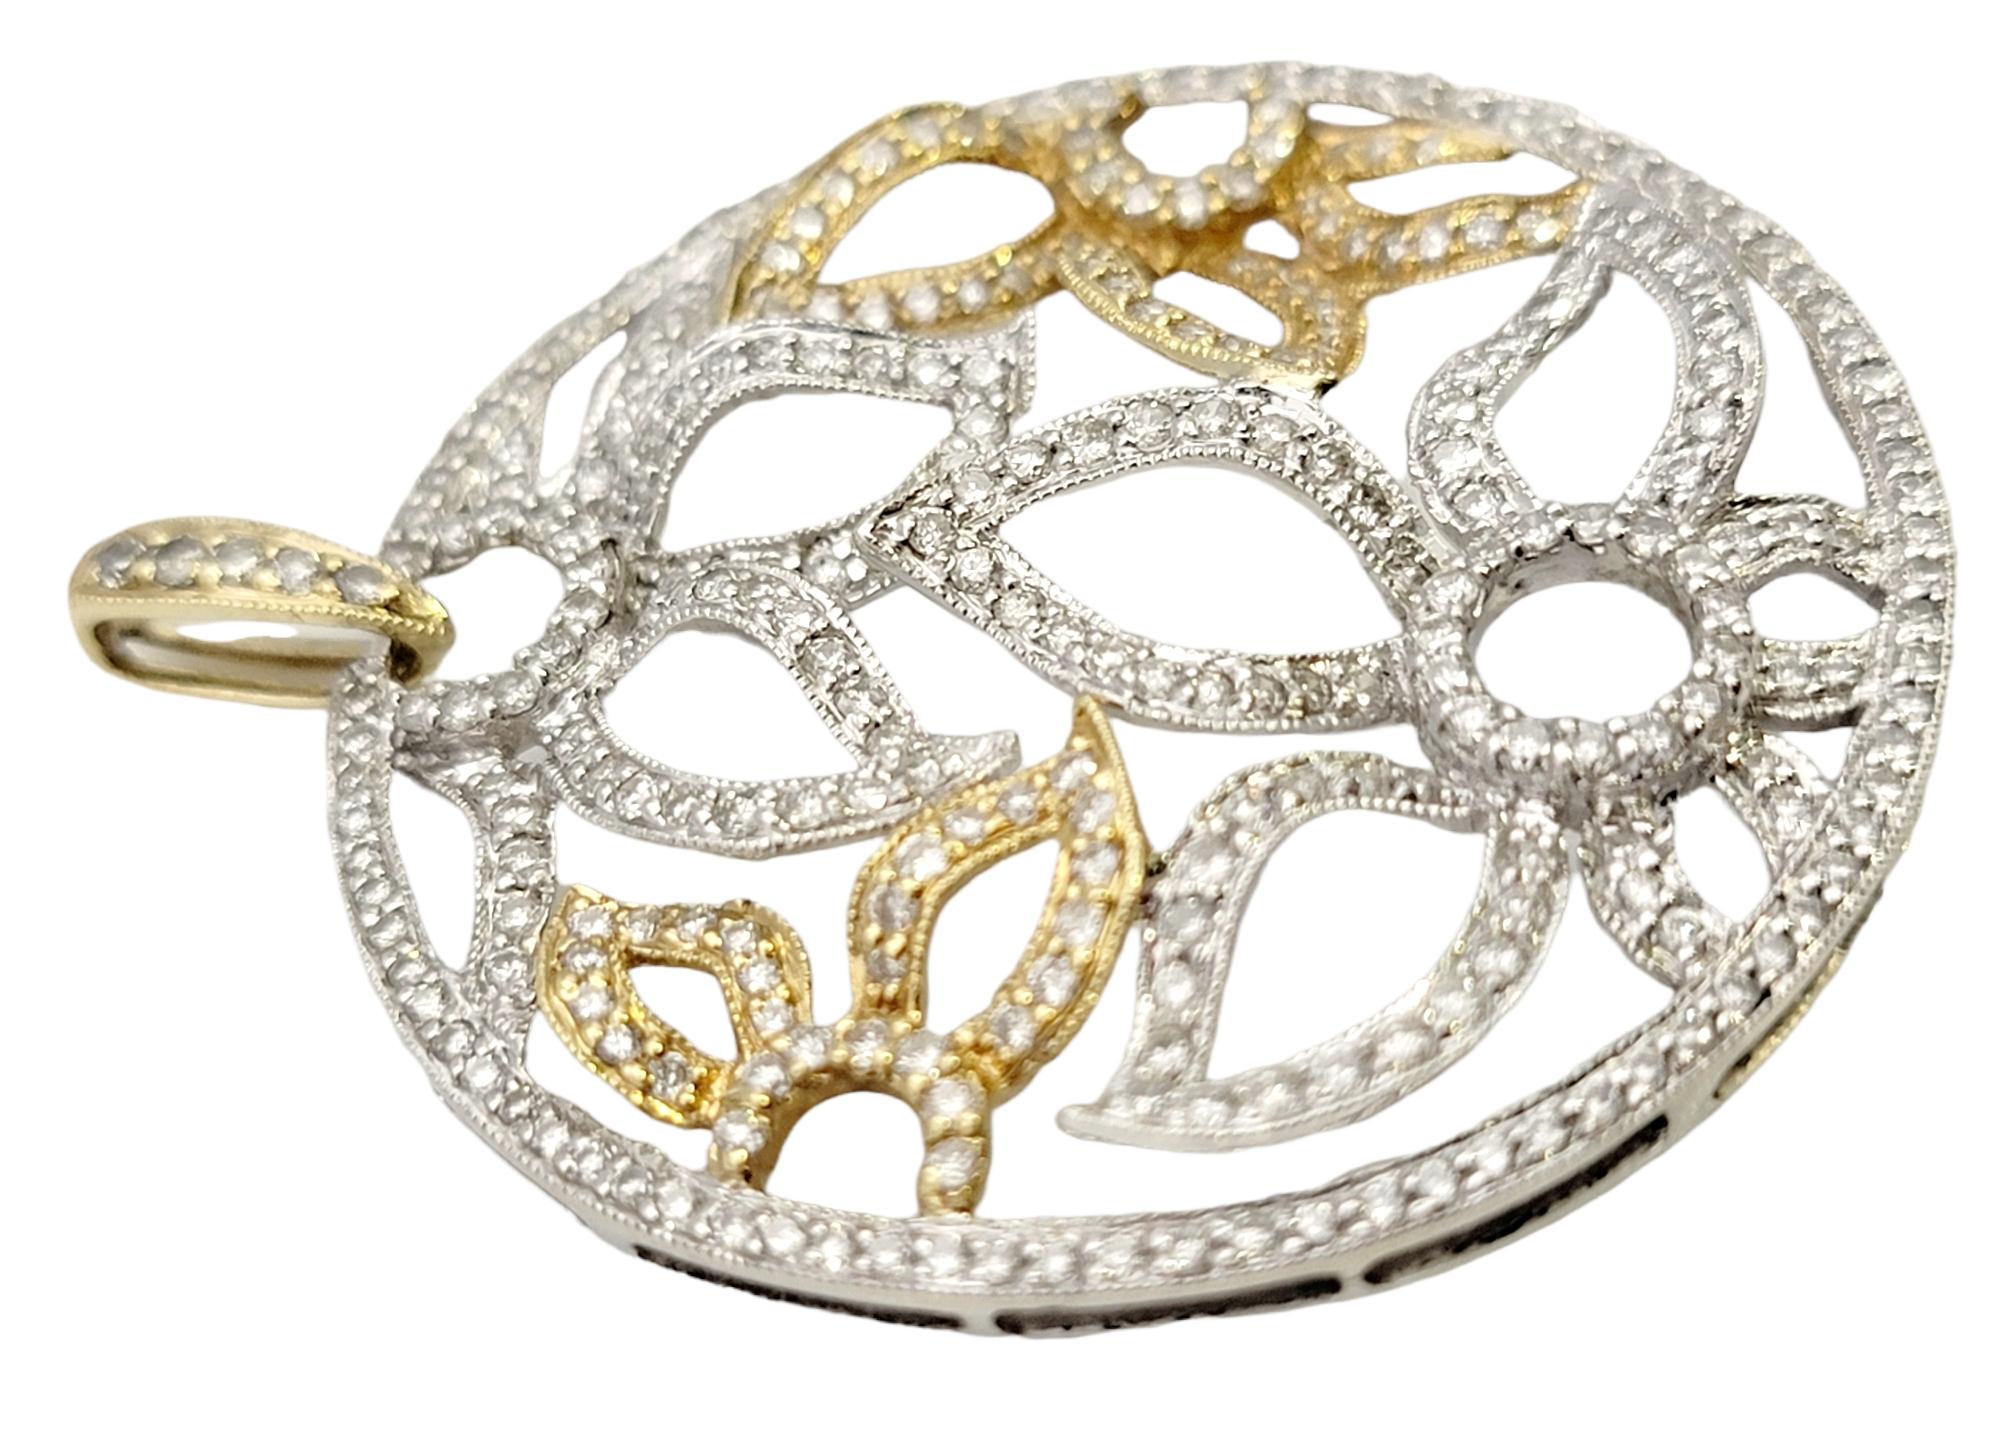 Stunningly sparking diamond pendant with contemporary flower motif. This gorgeous piece features a glittering pave diamond disc filled with an open floral design set in yellow and white gold. The intricate petals curve slightly throughout, really